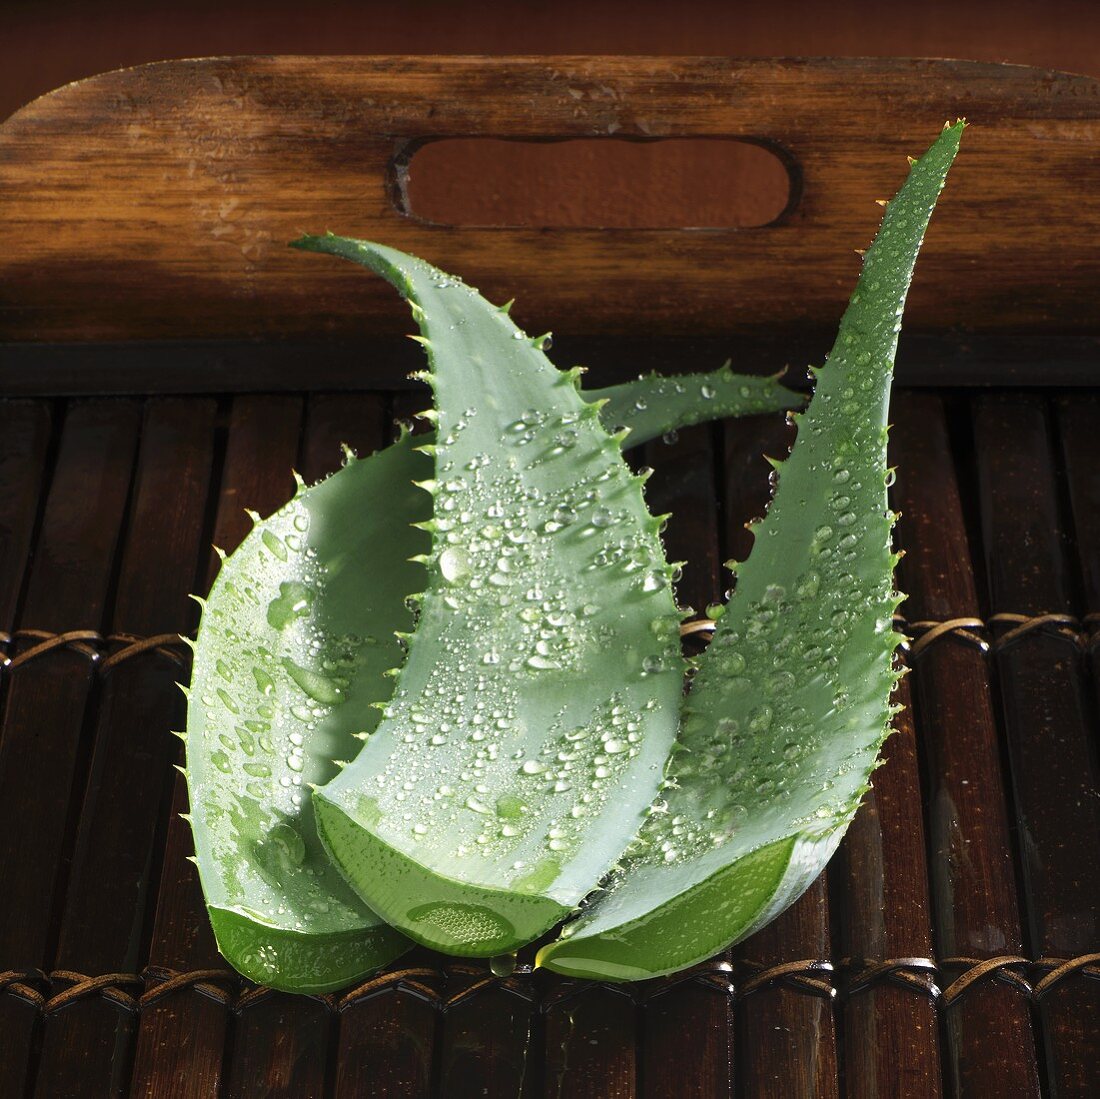 Aloe vera leaves (cut off the plant) with drops of water